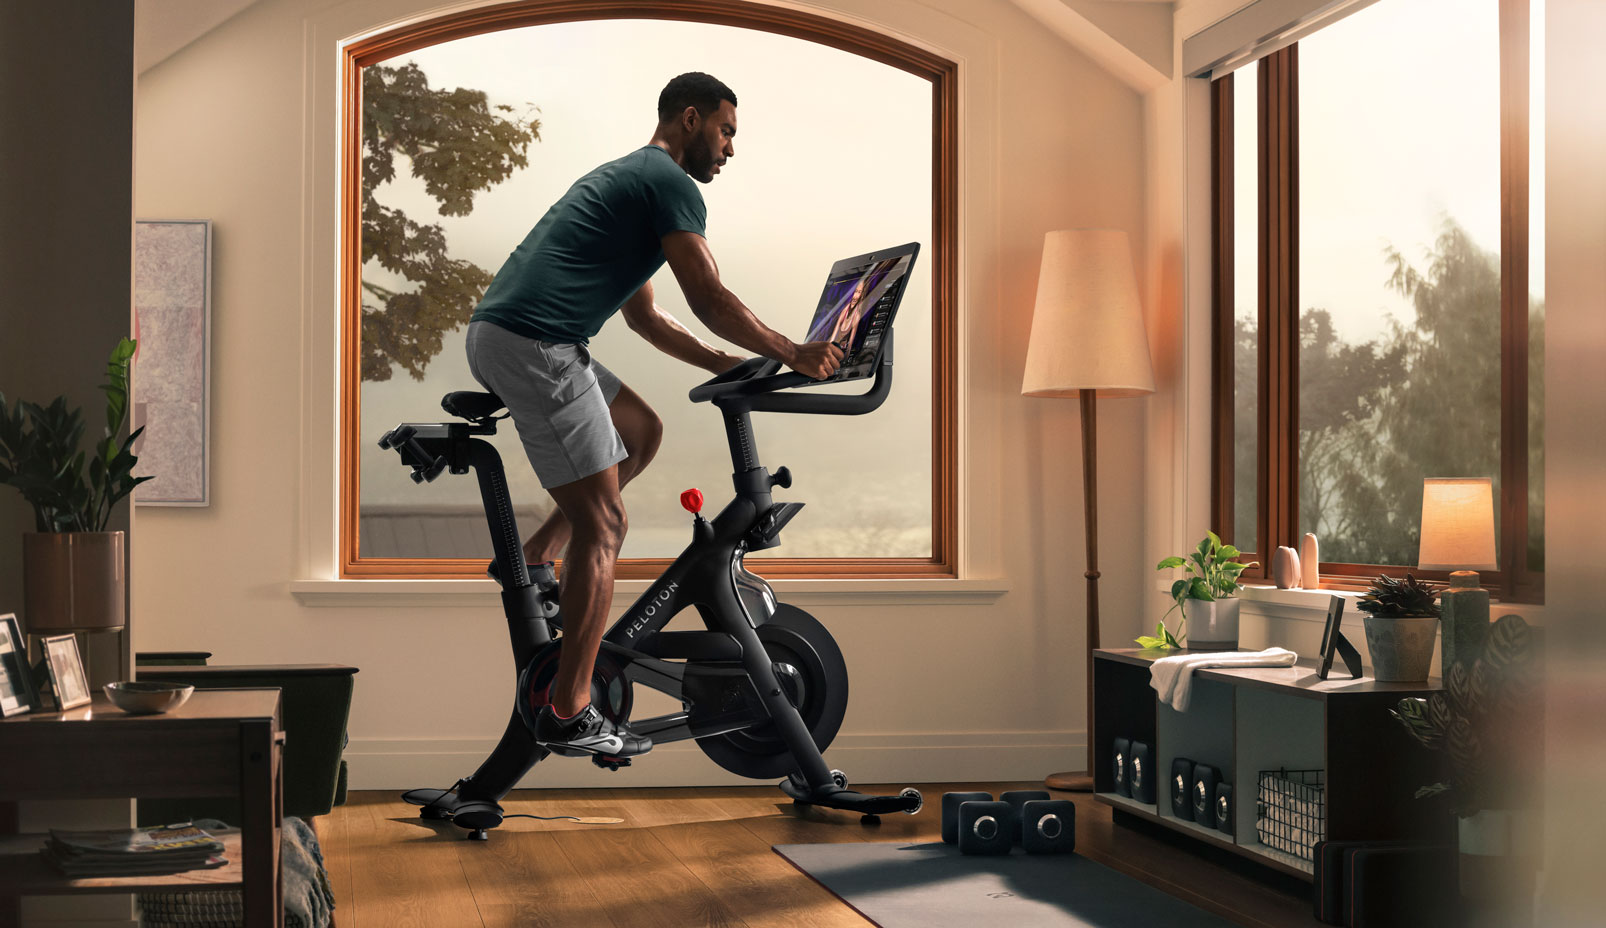 Peloton is increasing its subscription fees starting June 1 | TechCrunch